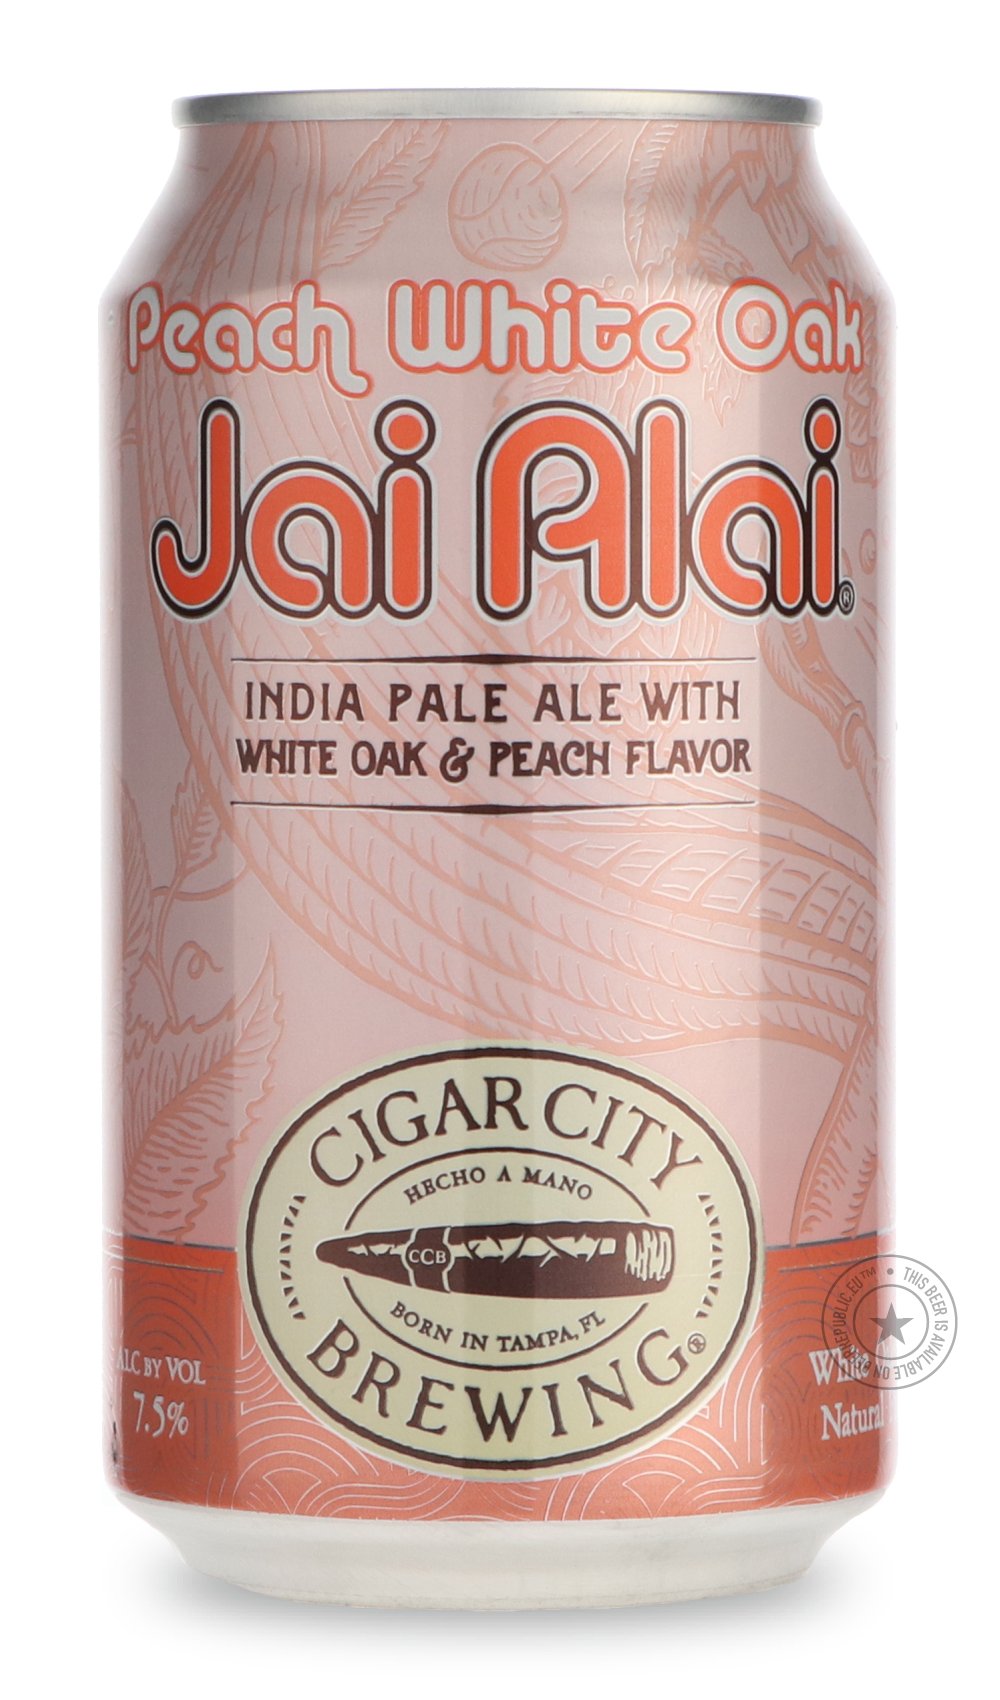 -Cigar City- Peach White Oak Jai Alai-IPA- Only @ Beer Republic - The best online beer store for American & Canadian craft beer - Buy beer online from the USA and Canada - Bier online kopen - Amerikaans bier kopen - Craft beer store - Craft beer kopen - Amerikanisch bier kaufen - Bier online kaufen - Acheter biere online - IPA - Stout - Porter - New England IPA - Hazy IPA - Imperial Stout - Barrel Aged - Barrel Aged Imperial Stout - Brown - Dark beer - Blond - Blonde - Pilsner - Lager - Wheat - Weizen - Amb